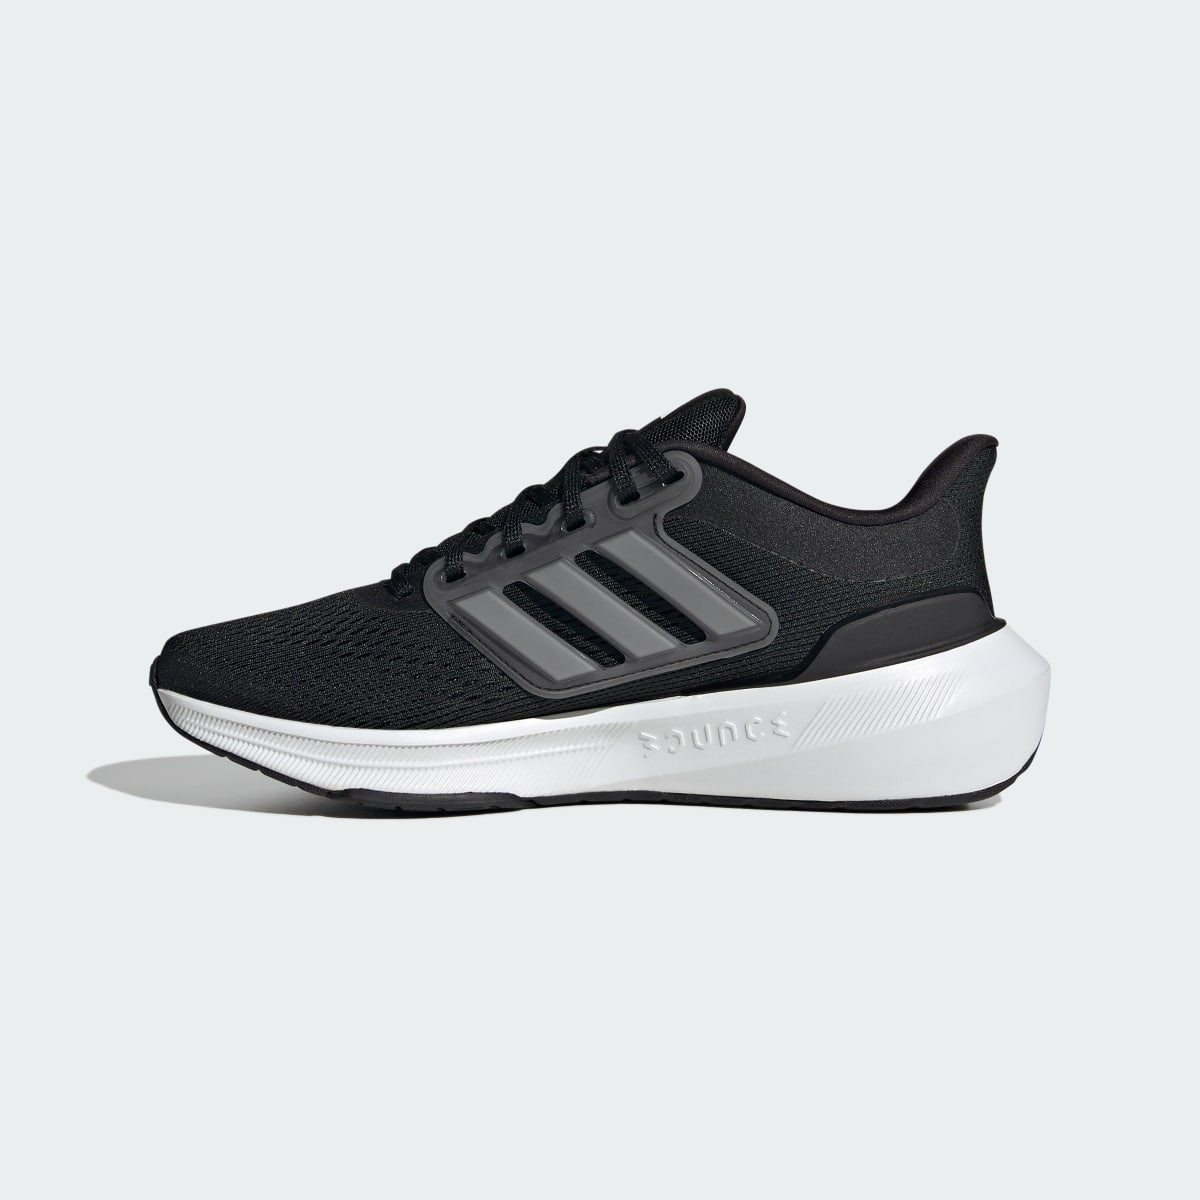 Adidas Ultrabounce Wide Shoes. 9